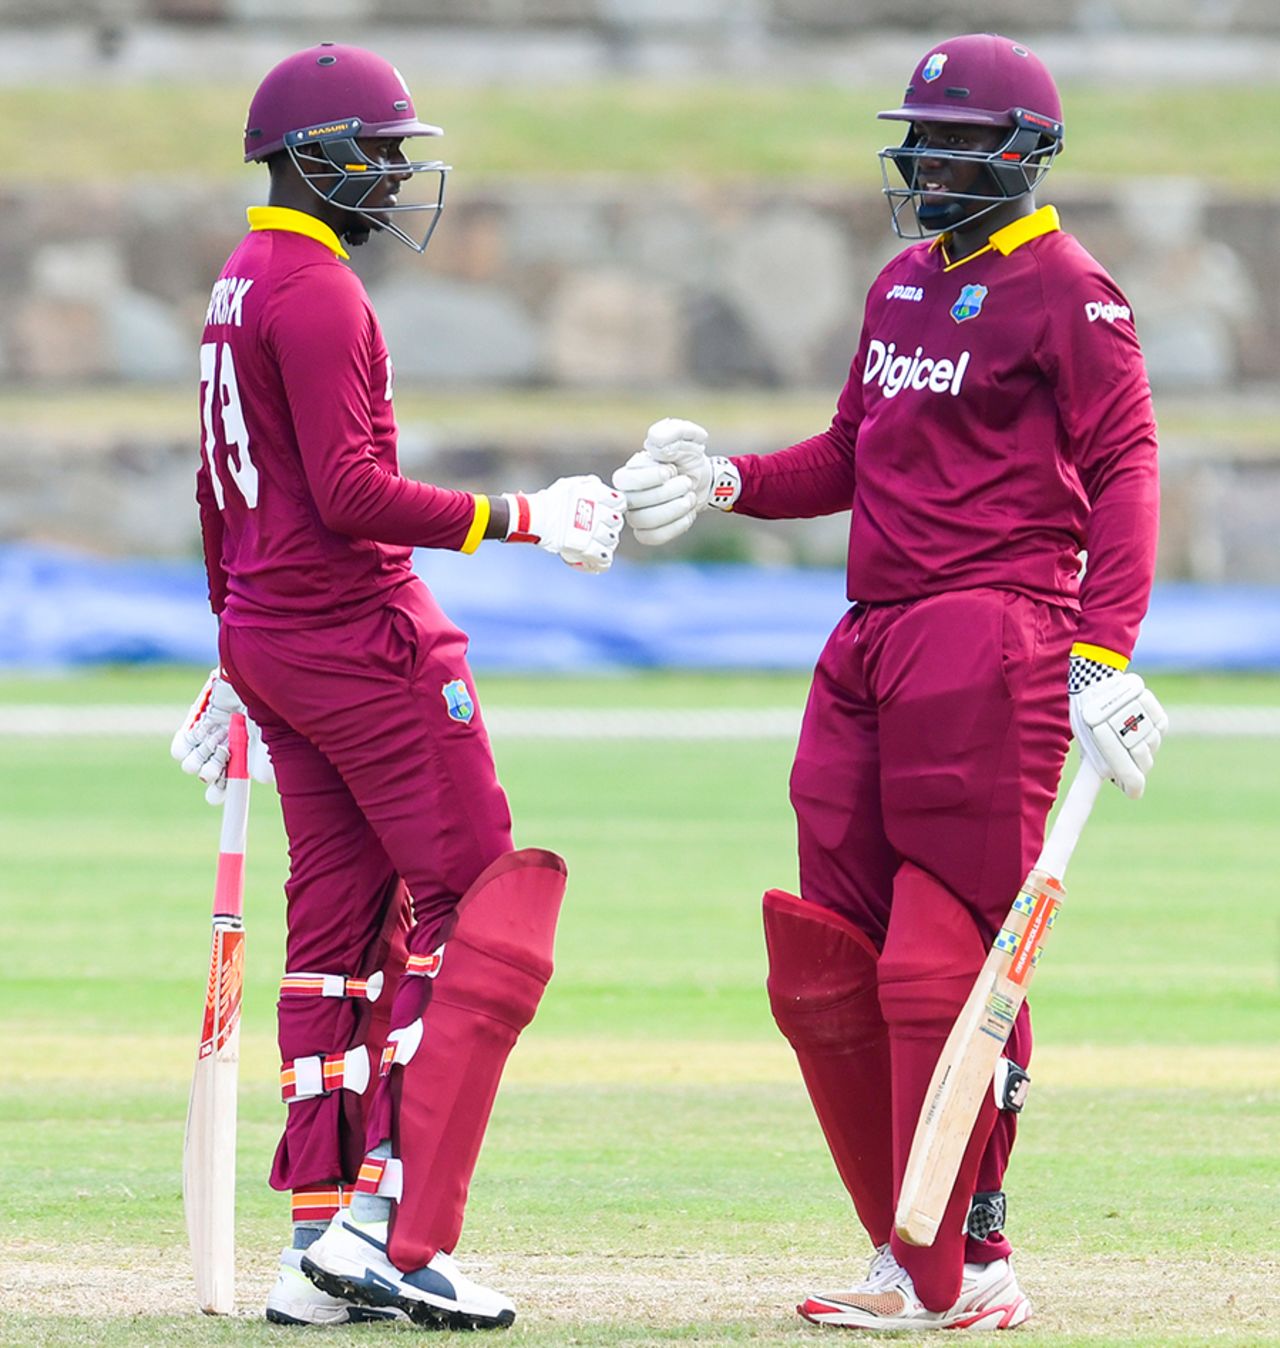 West Indies U-19 openers, Matthew Patrick and Shian Brathwaite, added 88 for the first wicket, West Indies Under-19s v Windward Islands, WICB Regional Super 50 2016-17, Group A, Antigua, February 4, 2017 